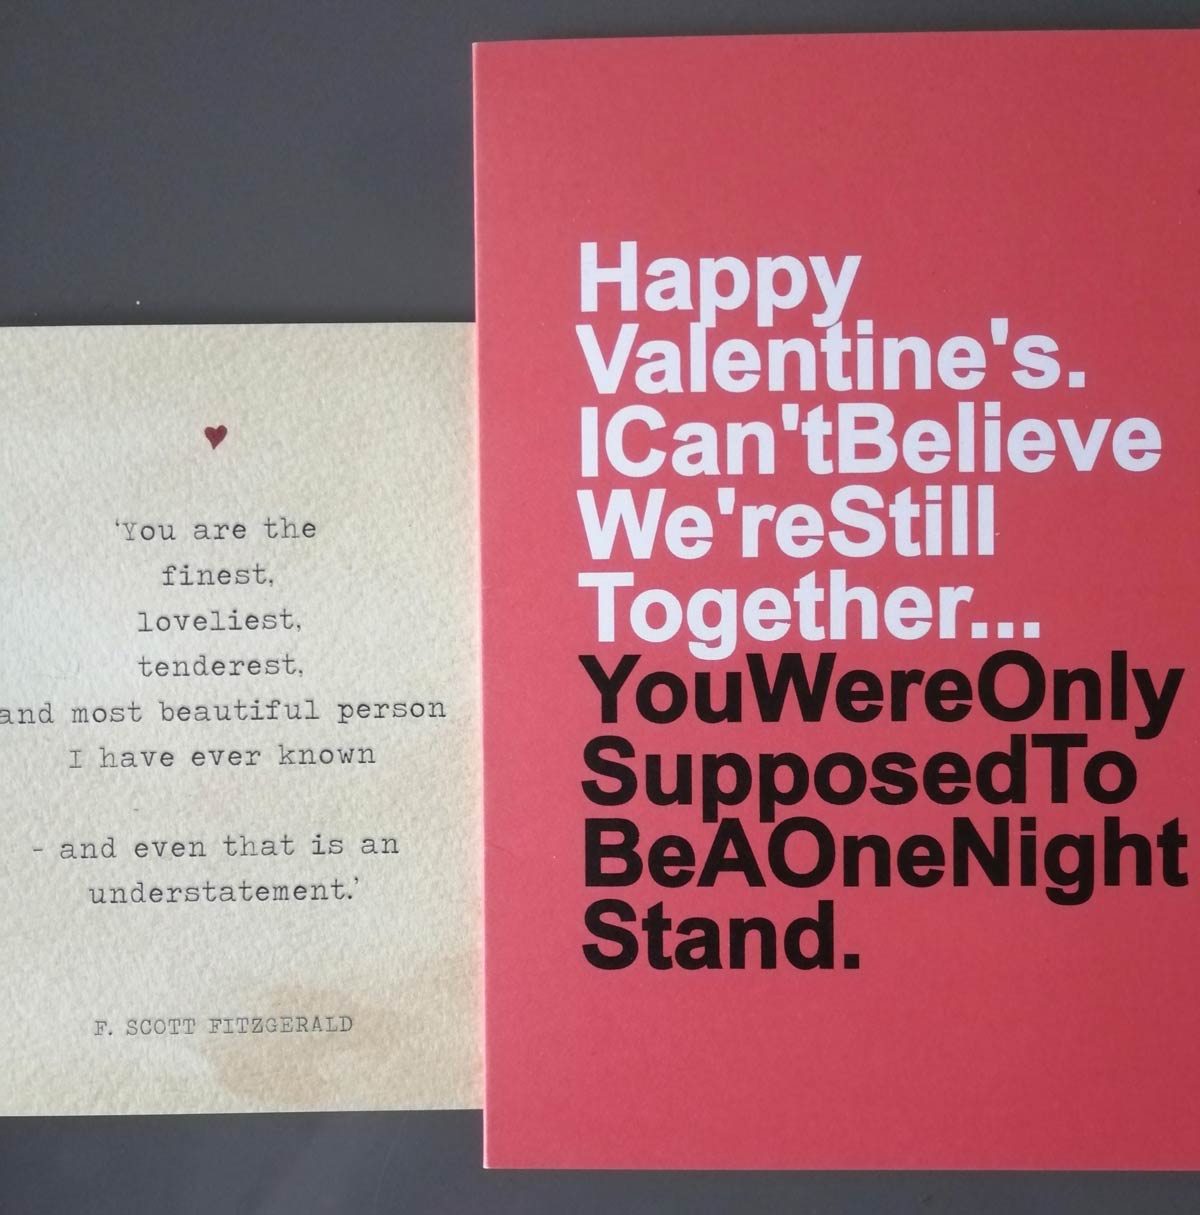 My dad's valentine's card on the left, compared to my mom's